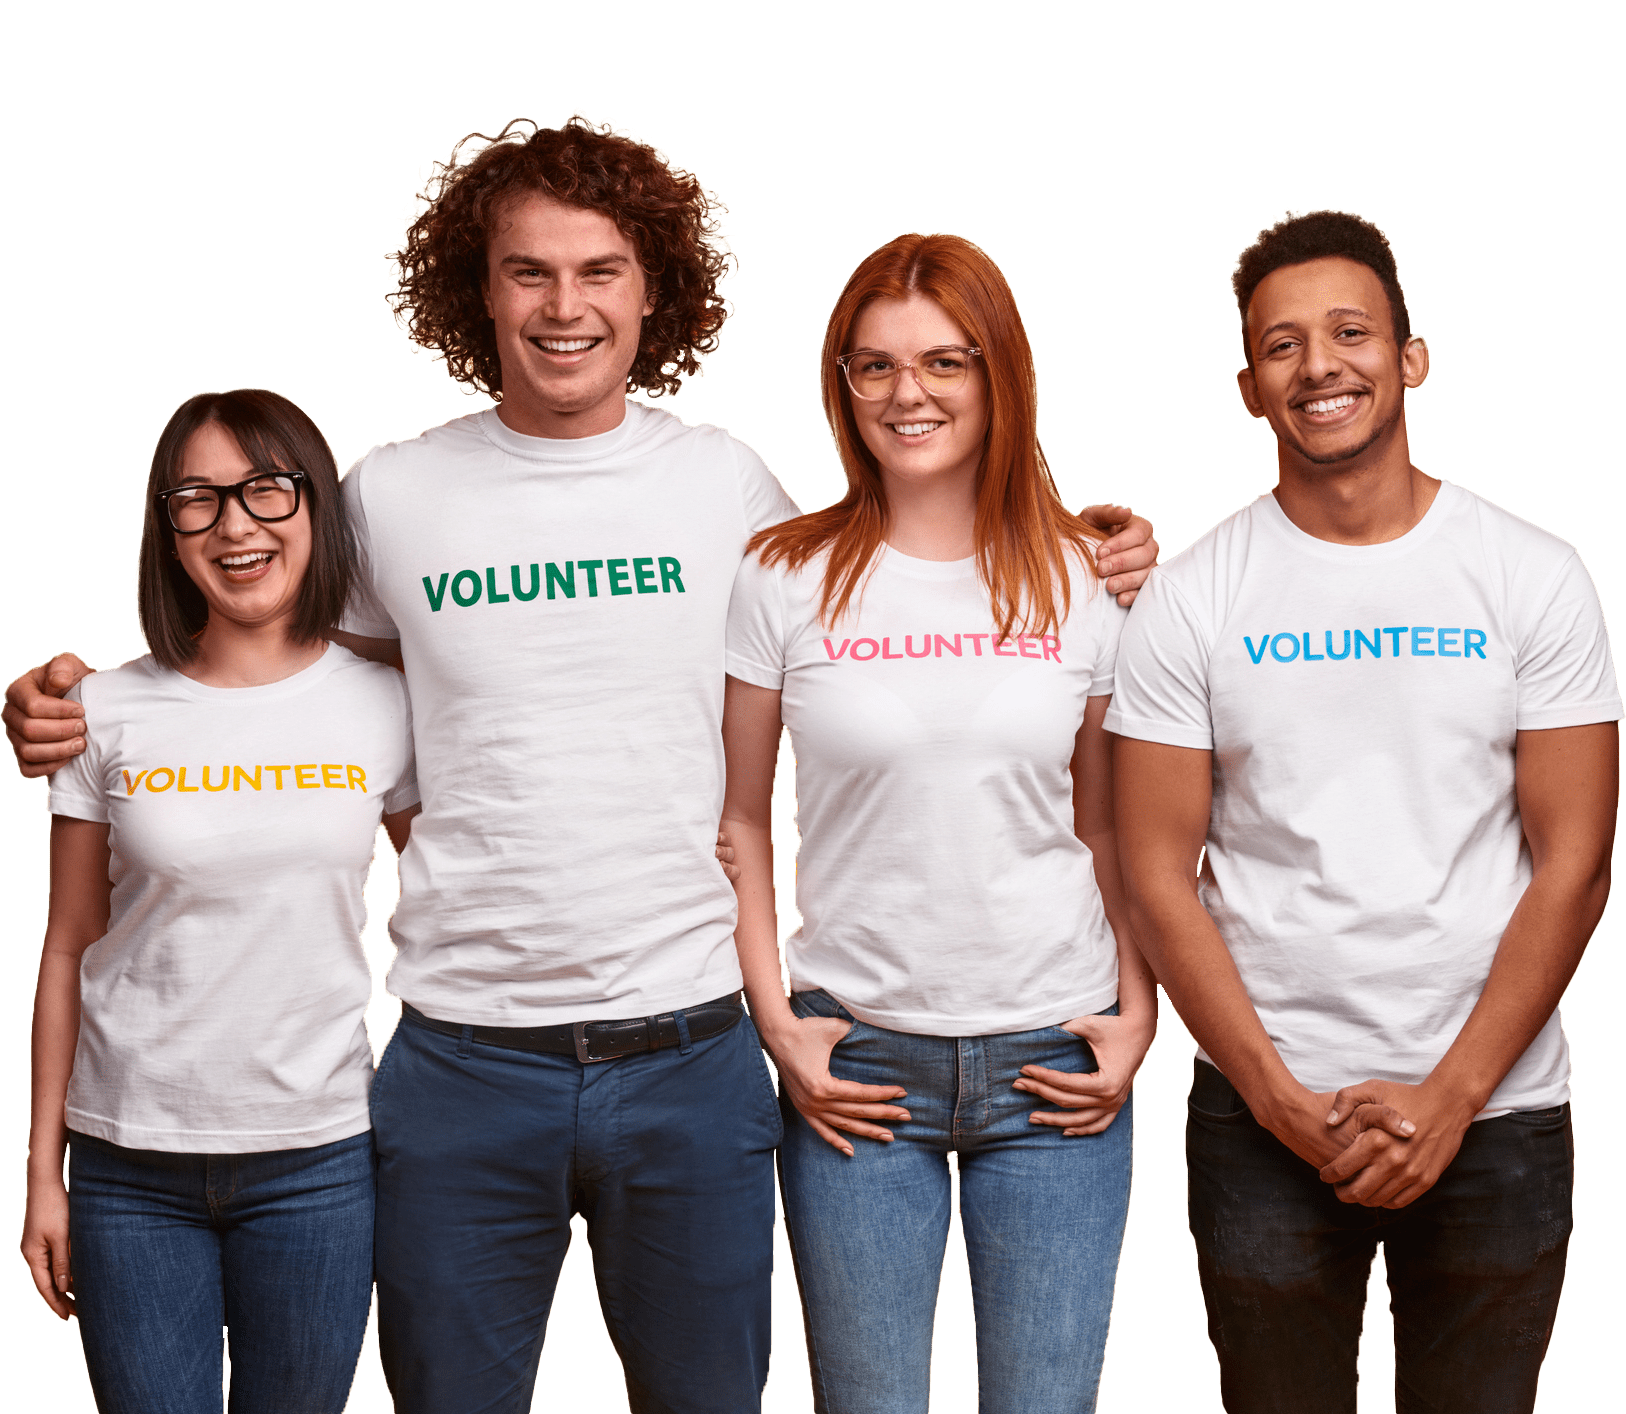 Group of diverse young people in volunteer T-shirts cheerfully smiling and looking at camera